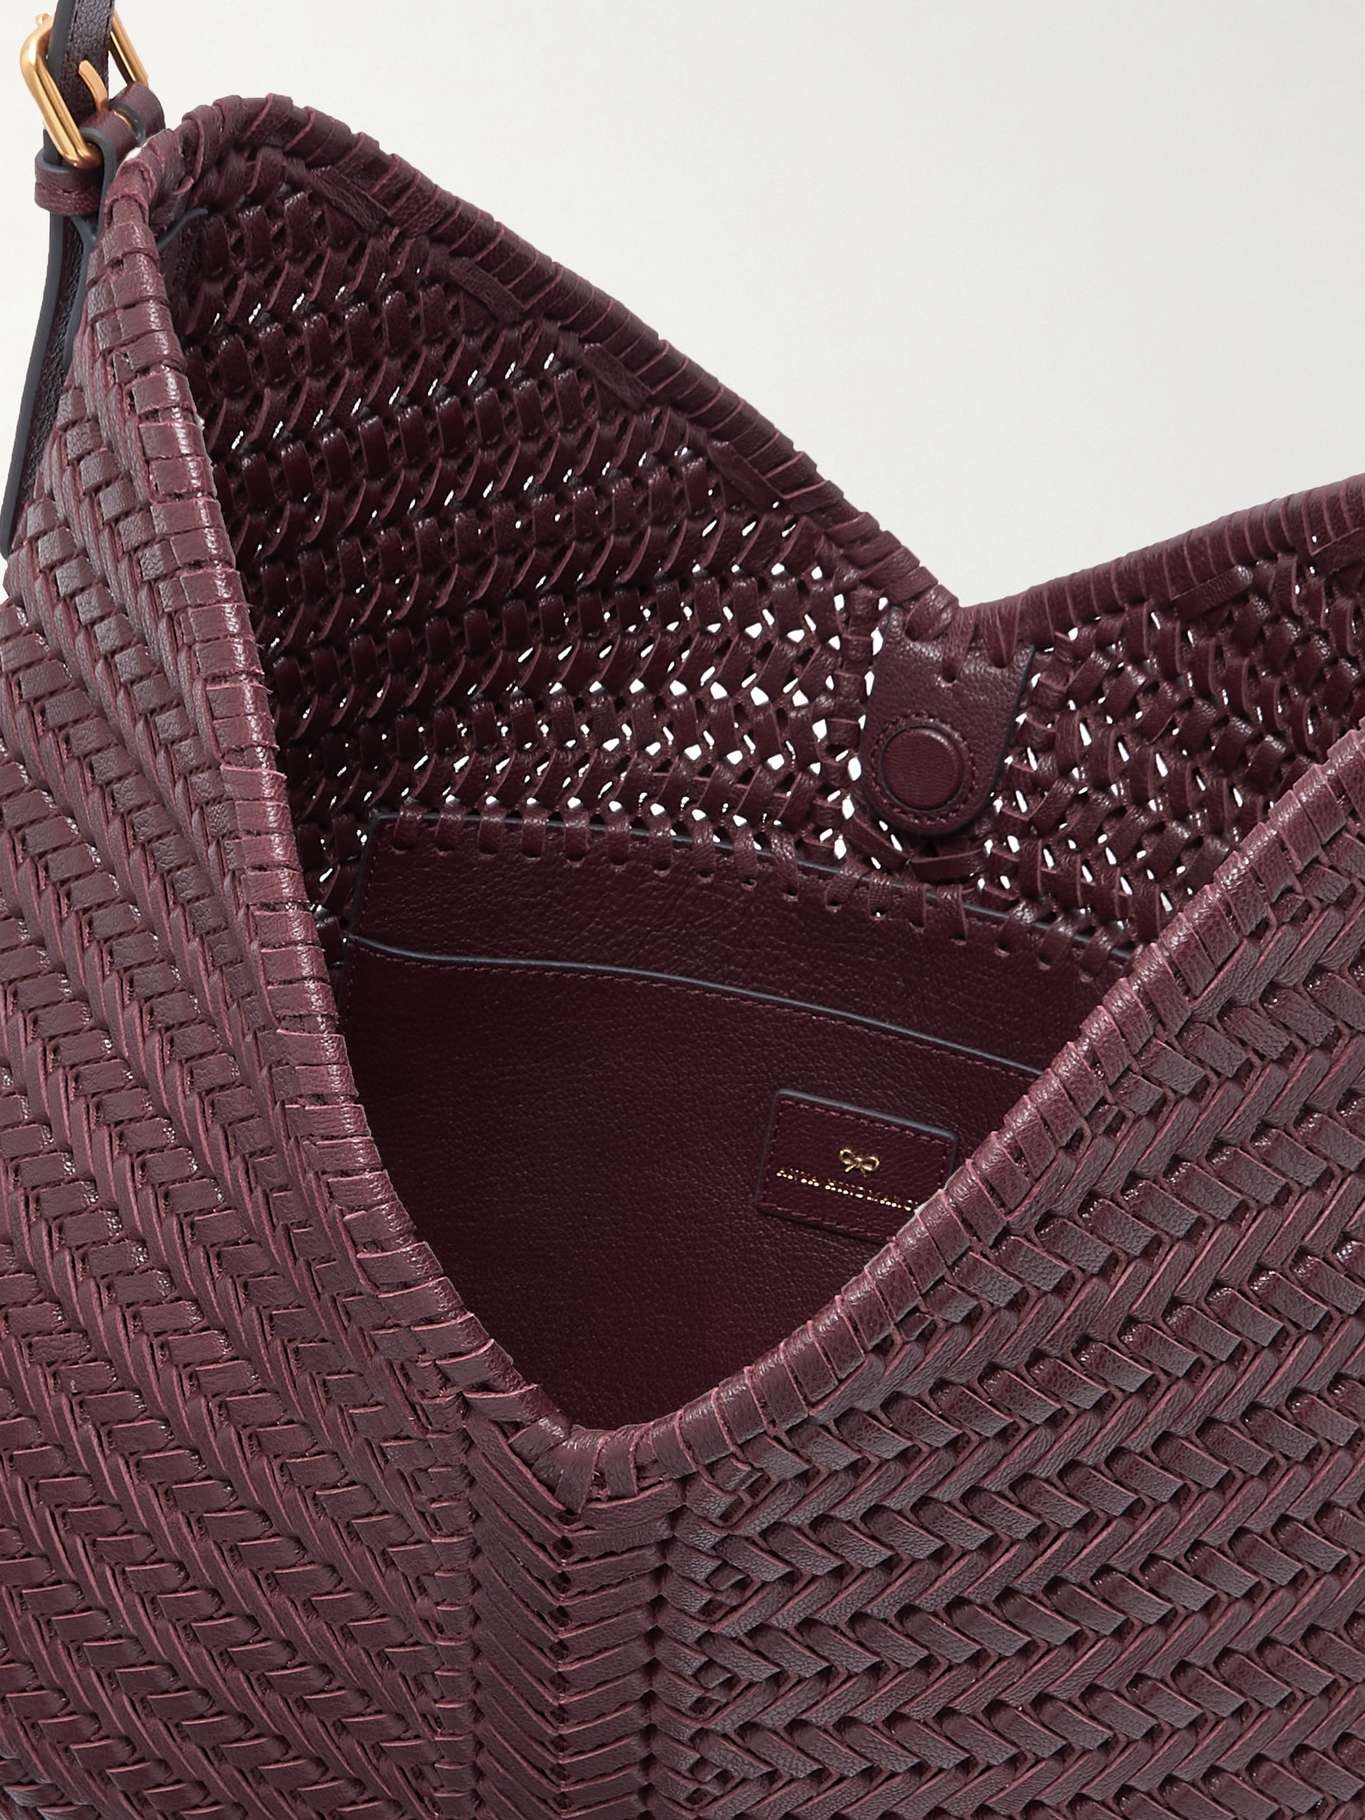 The Neeson tasseled woven leather tote - 5